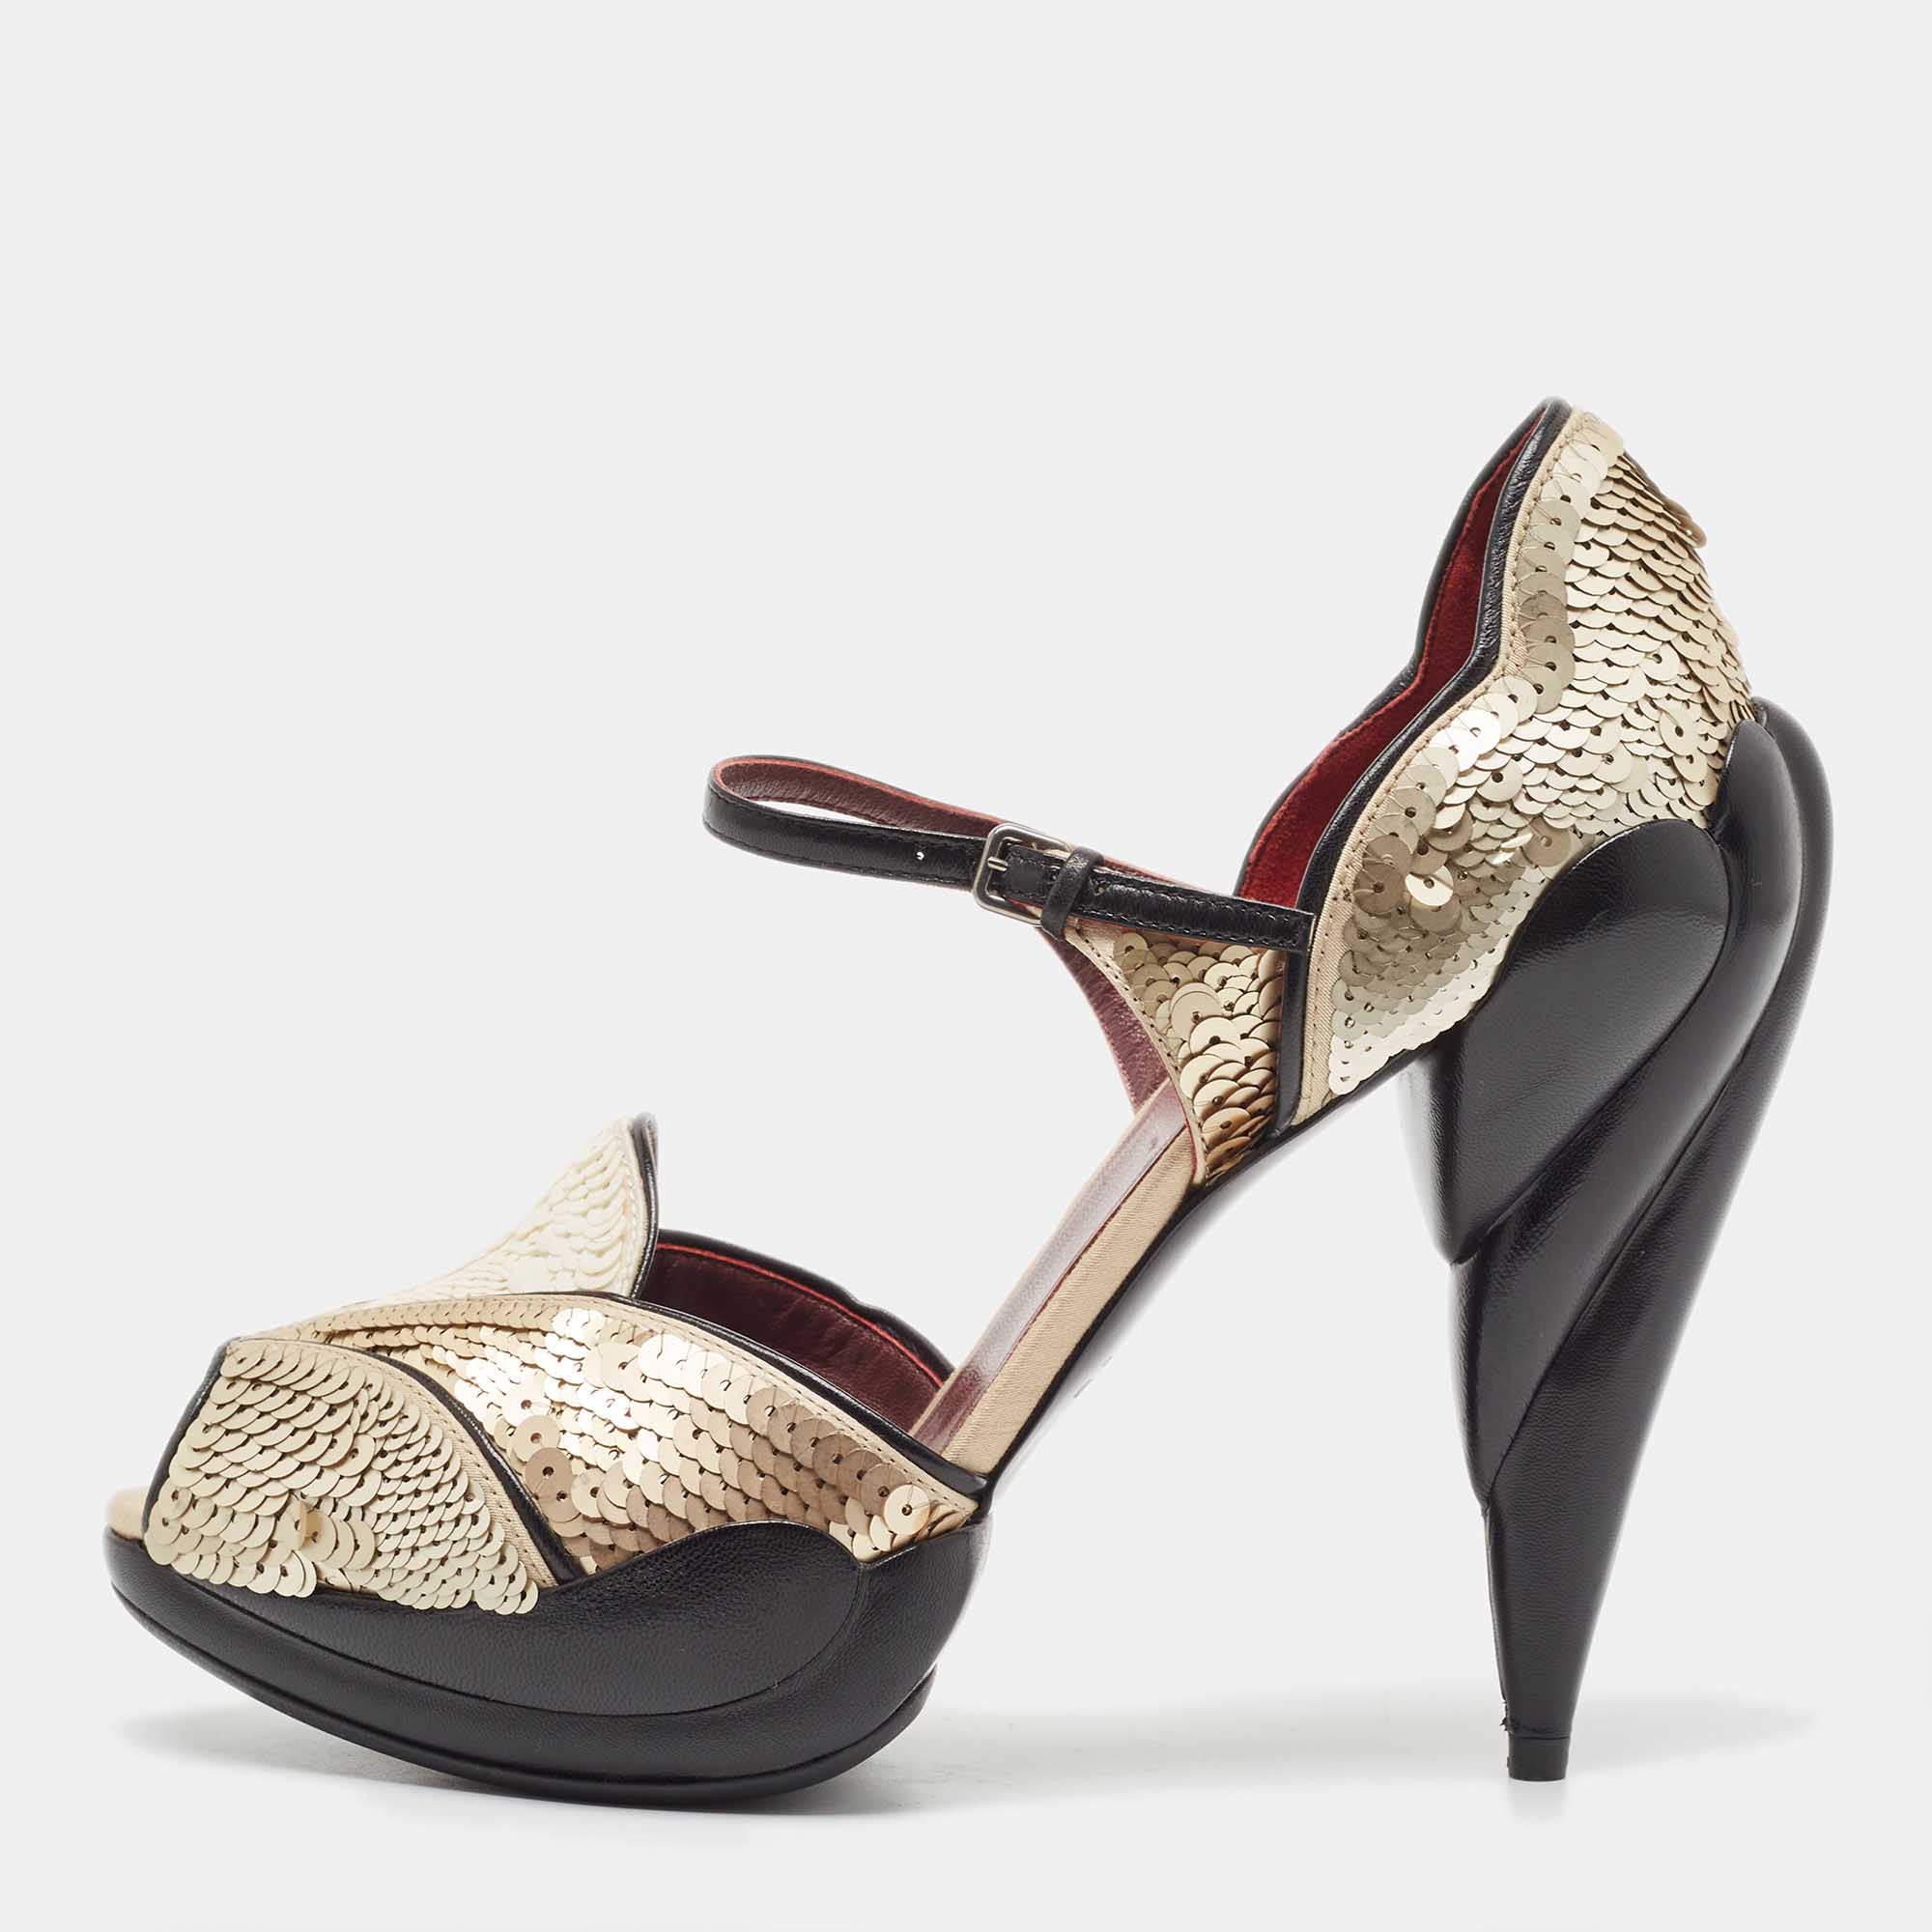 Miu Miu Gold/Black Sequin And Leather Marry Jane Pumps Size 40.5